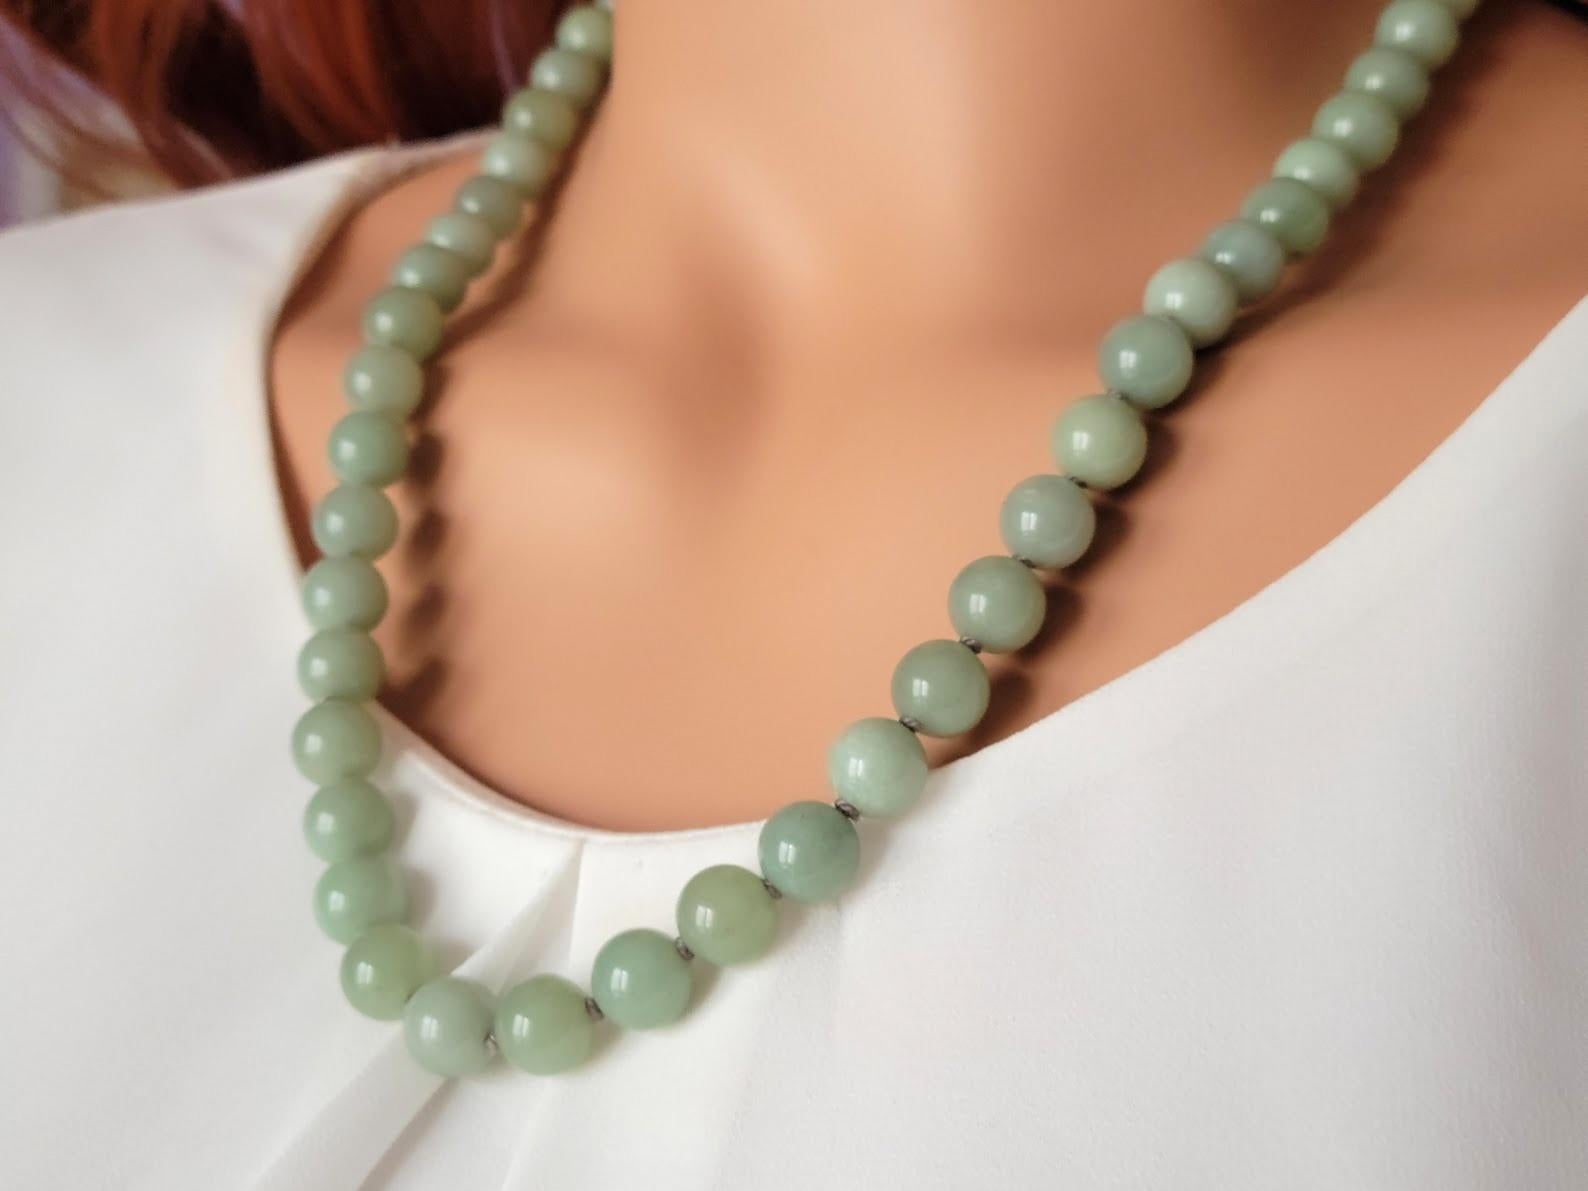 Bead New Zealand Green Jade Nephrite Necklace For Sale